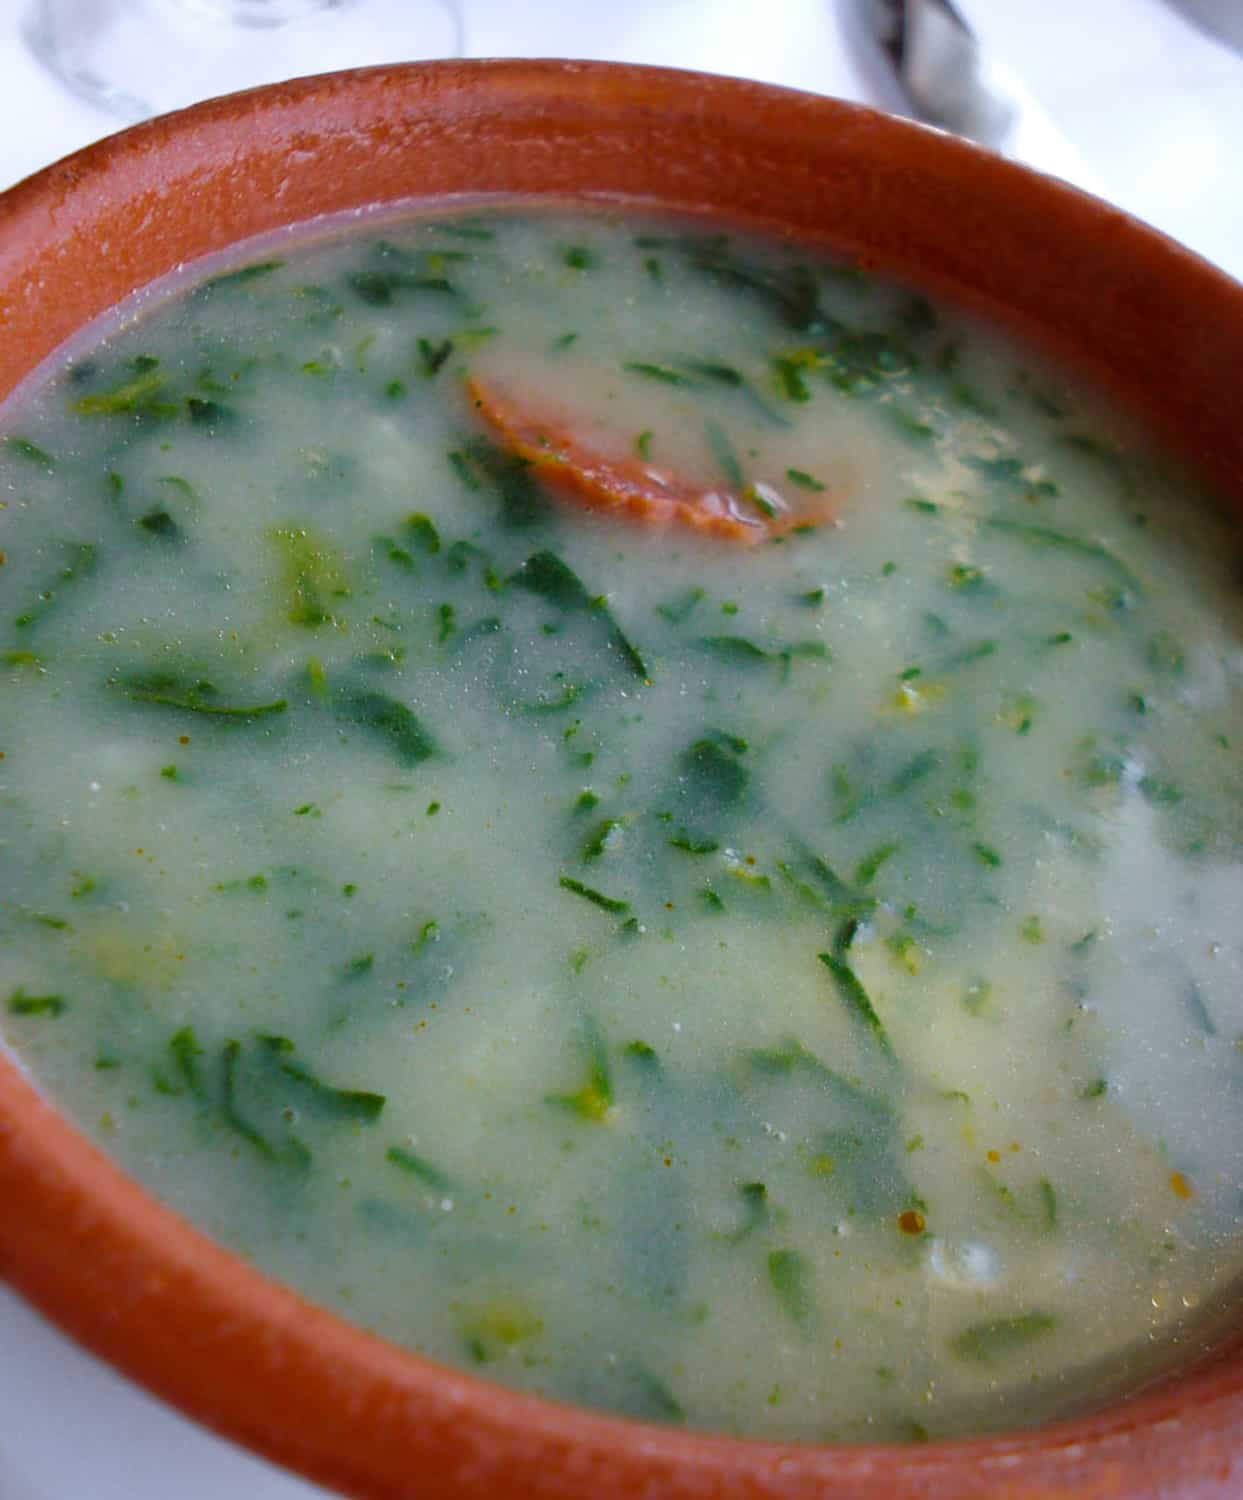 Caldo verde is a traditional food in Lisbon you don't want to miss, discover the other Portuguese food you should eat.